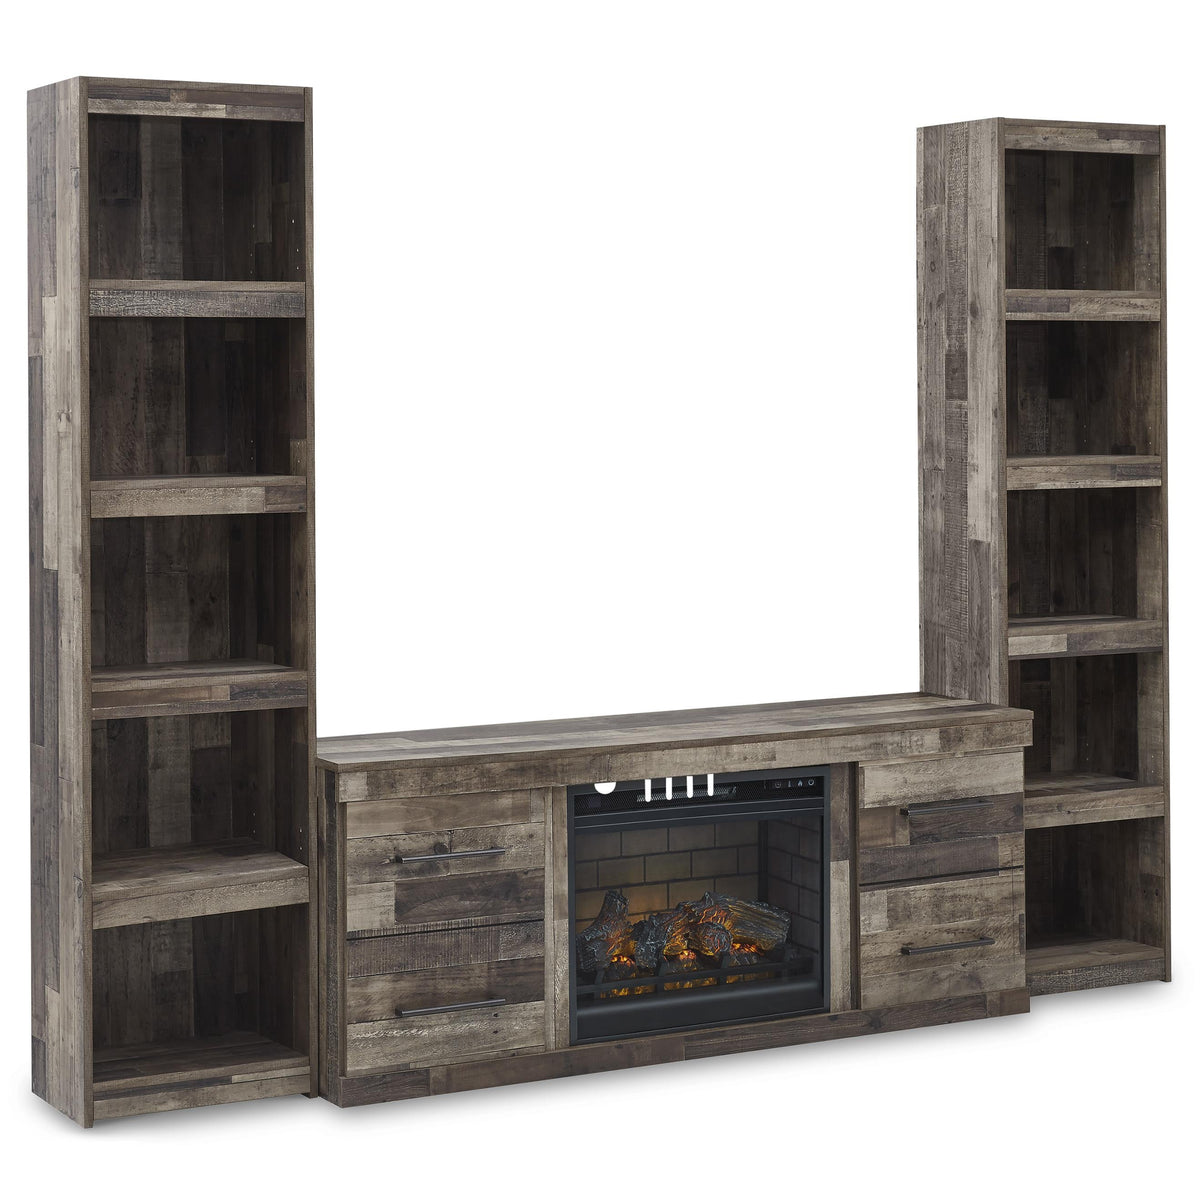 Signature Design by Ashley Derekson EW0200W10 3 pc Entertainment Center with Electric Fireplace